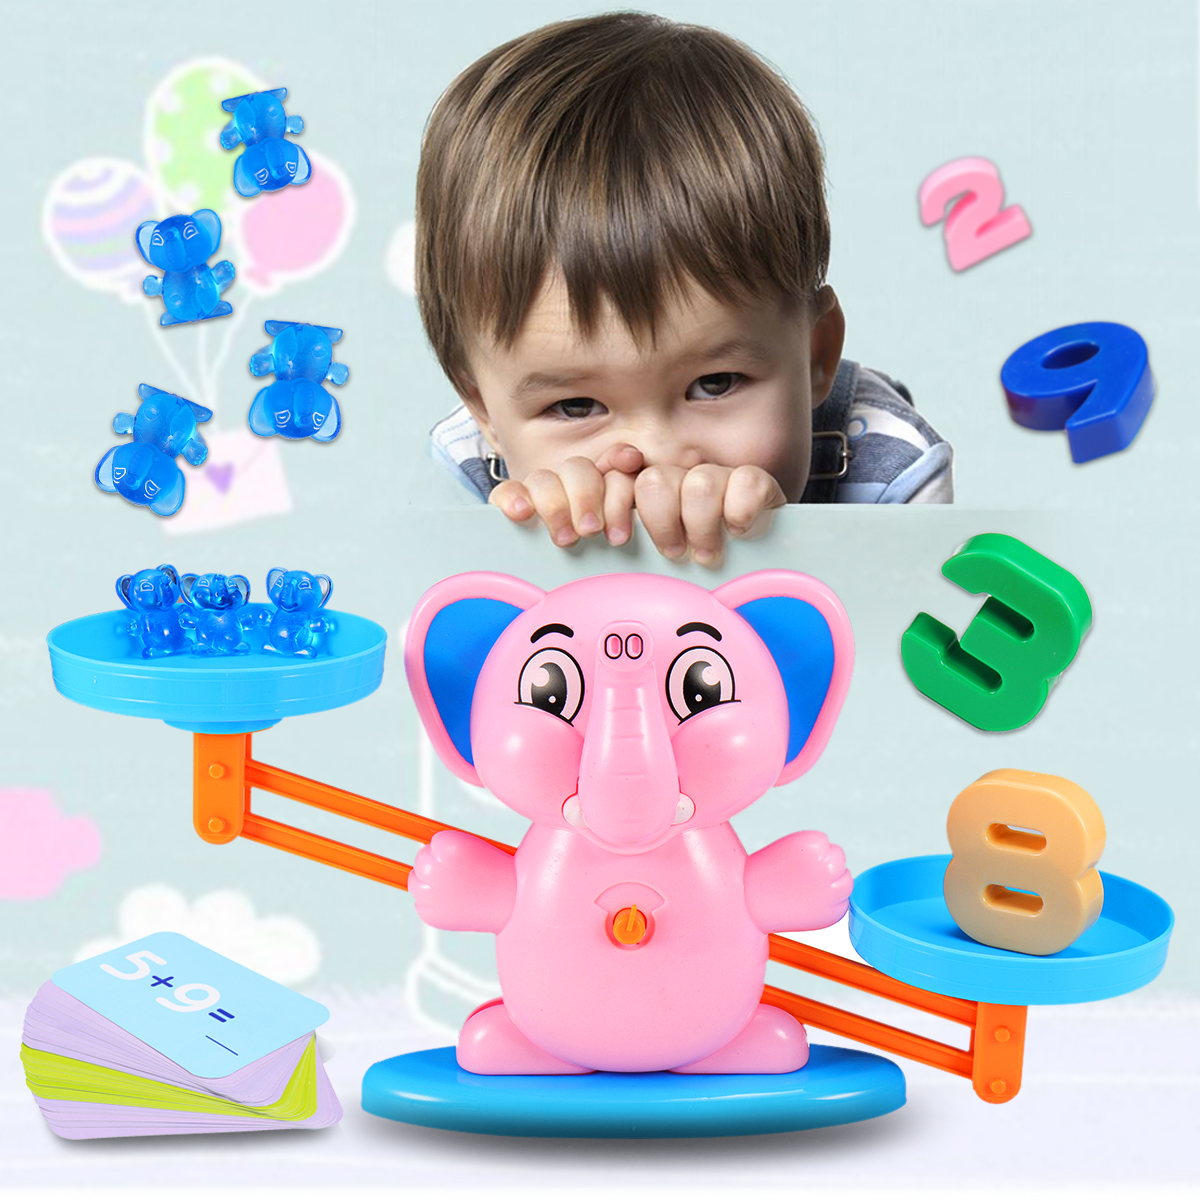 Math-Maths-Balance-Kid-Children-Toys-Educational-Counting-Learning-Game-Gift-1581032-2